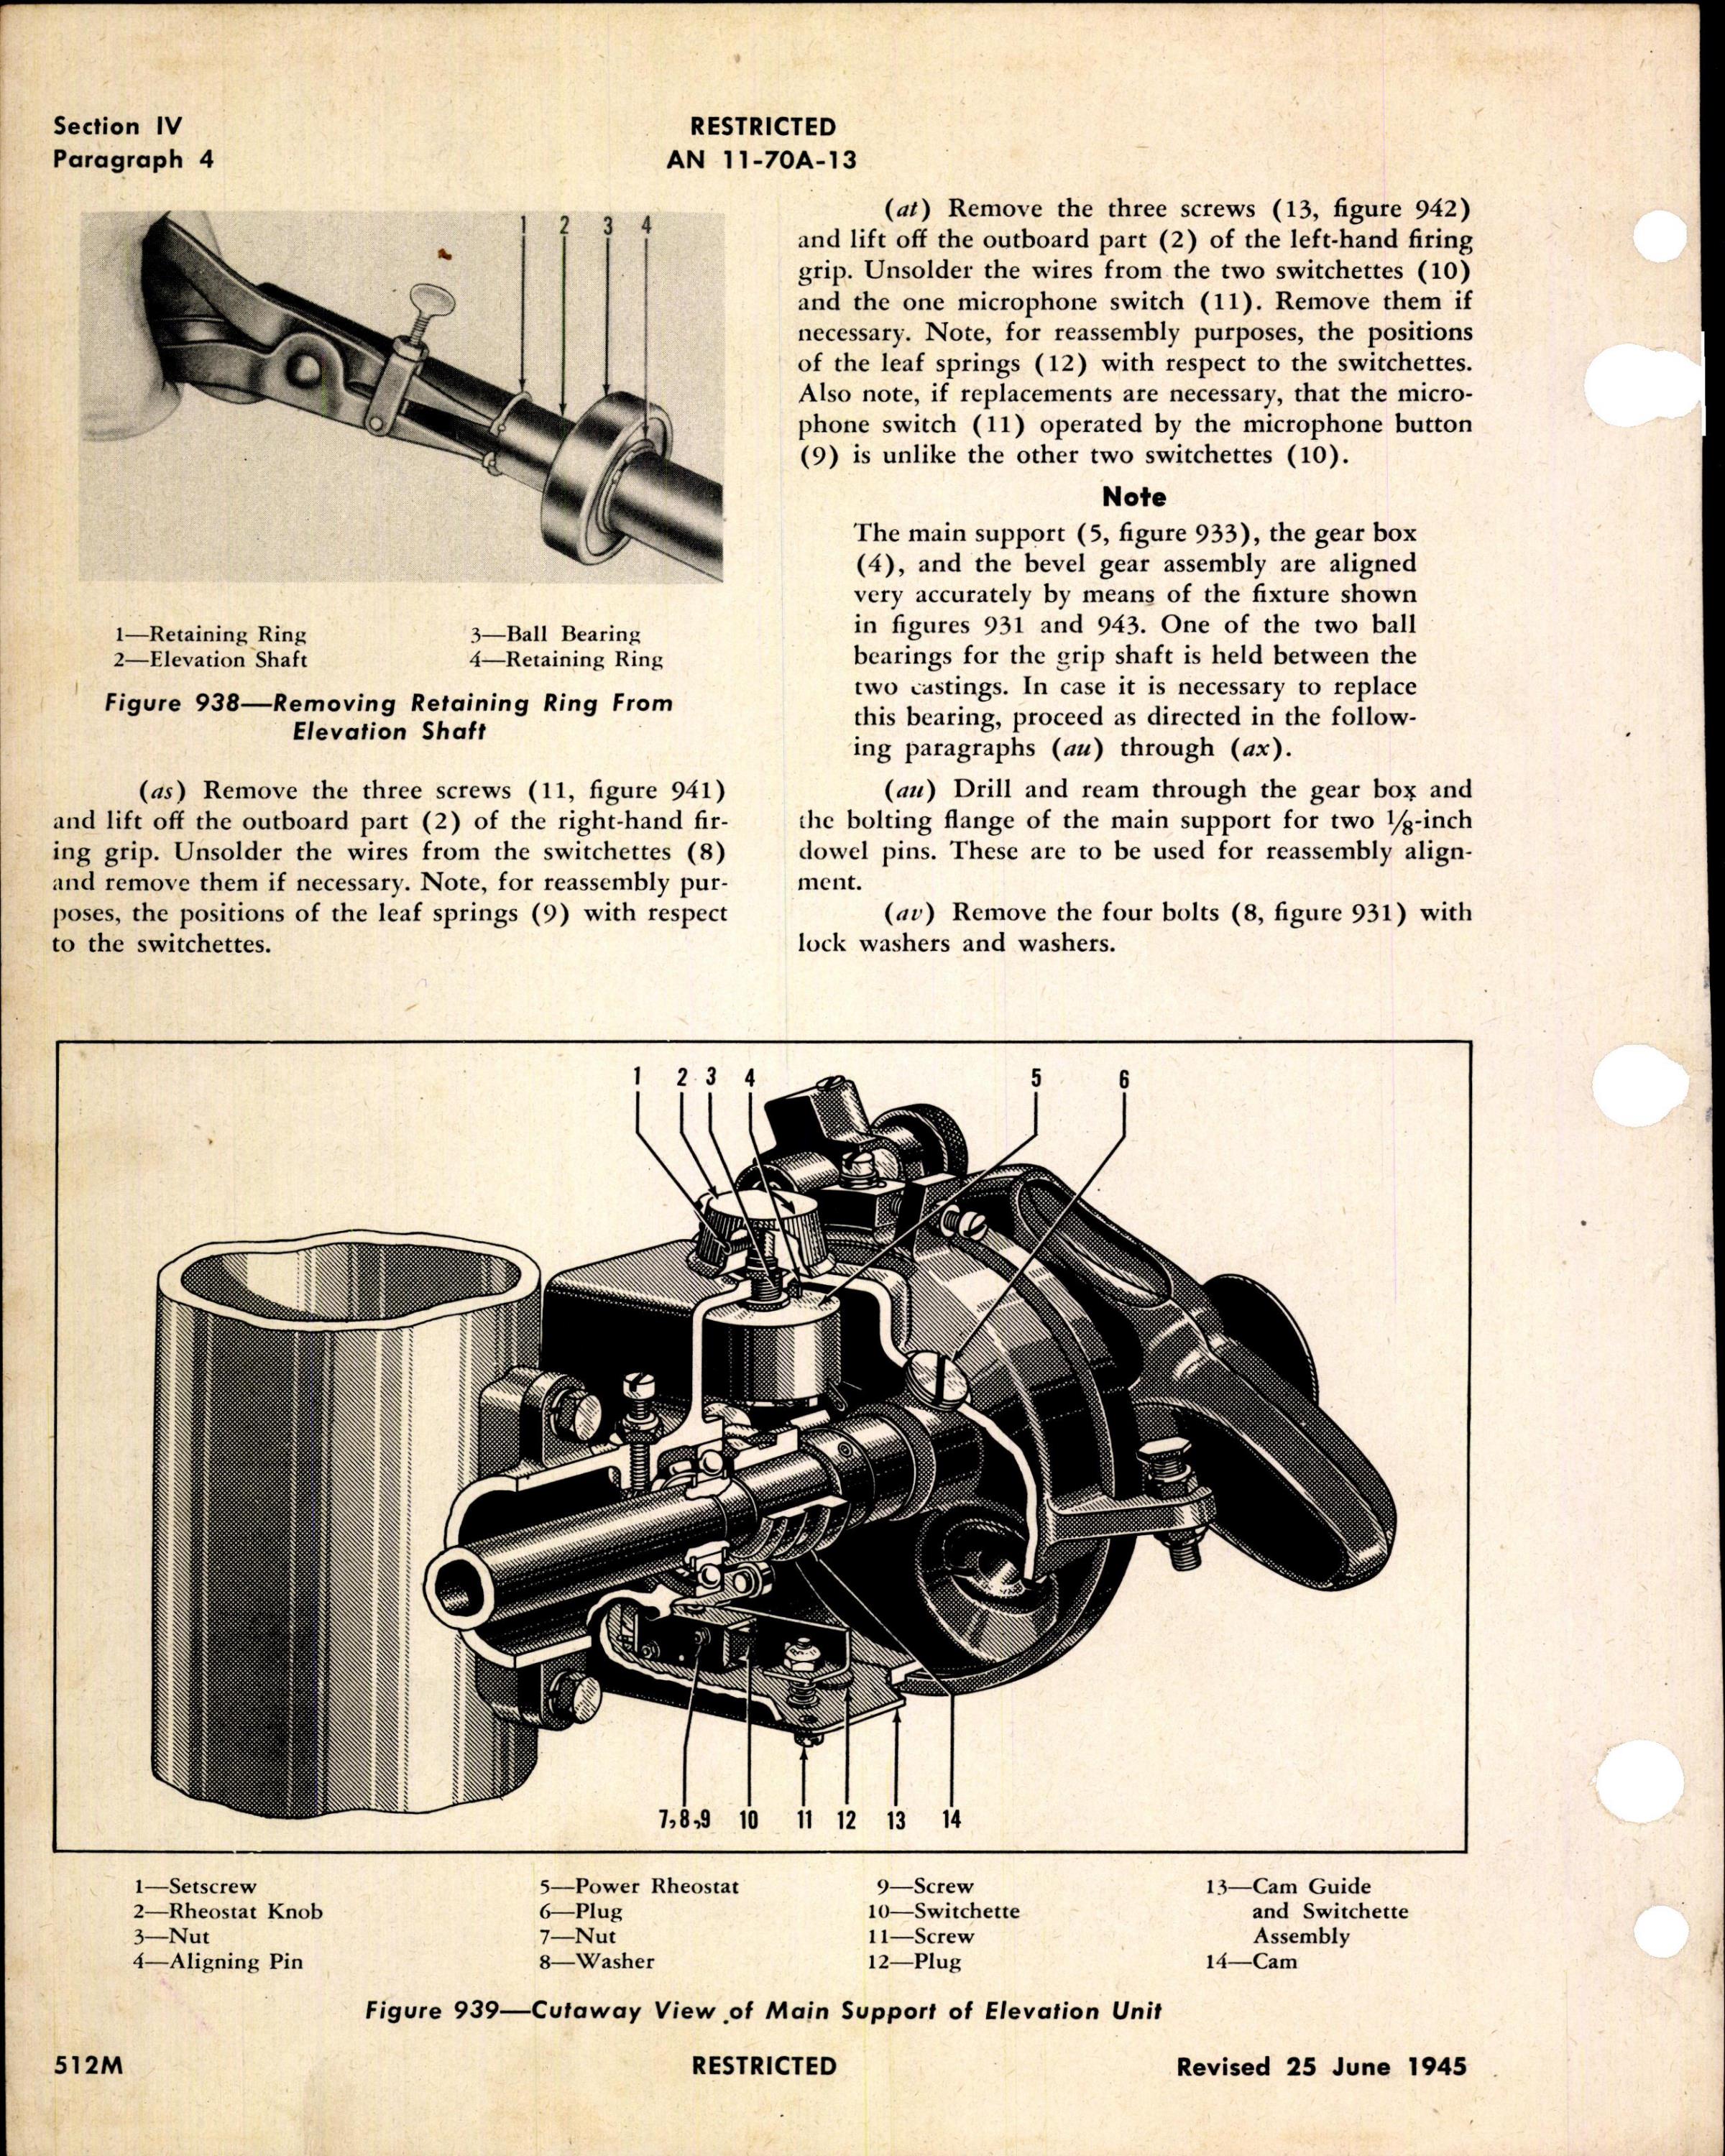 Sample page 4 from AirCorps Library document: Repair of Automatic Gun Charger - General Electric No. 8252911G1